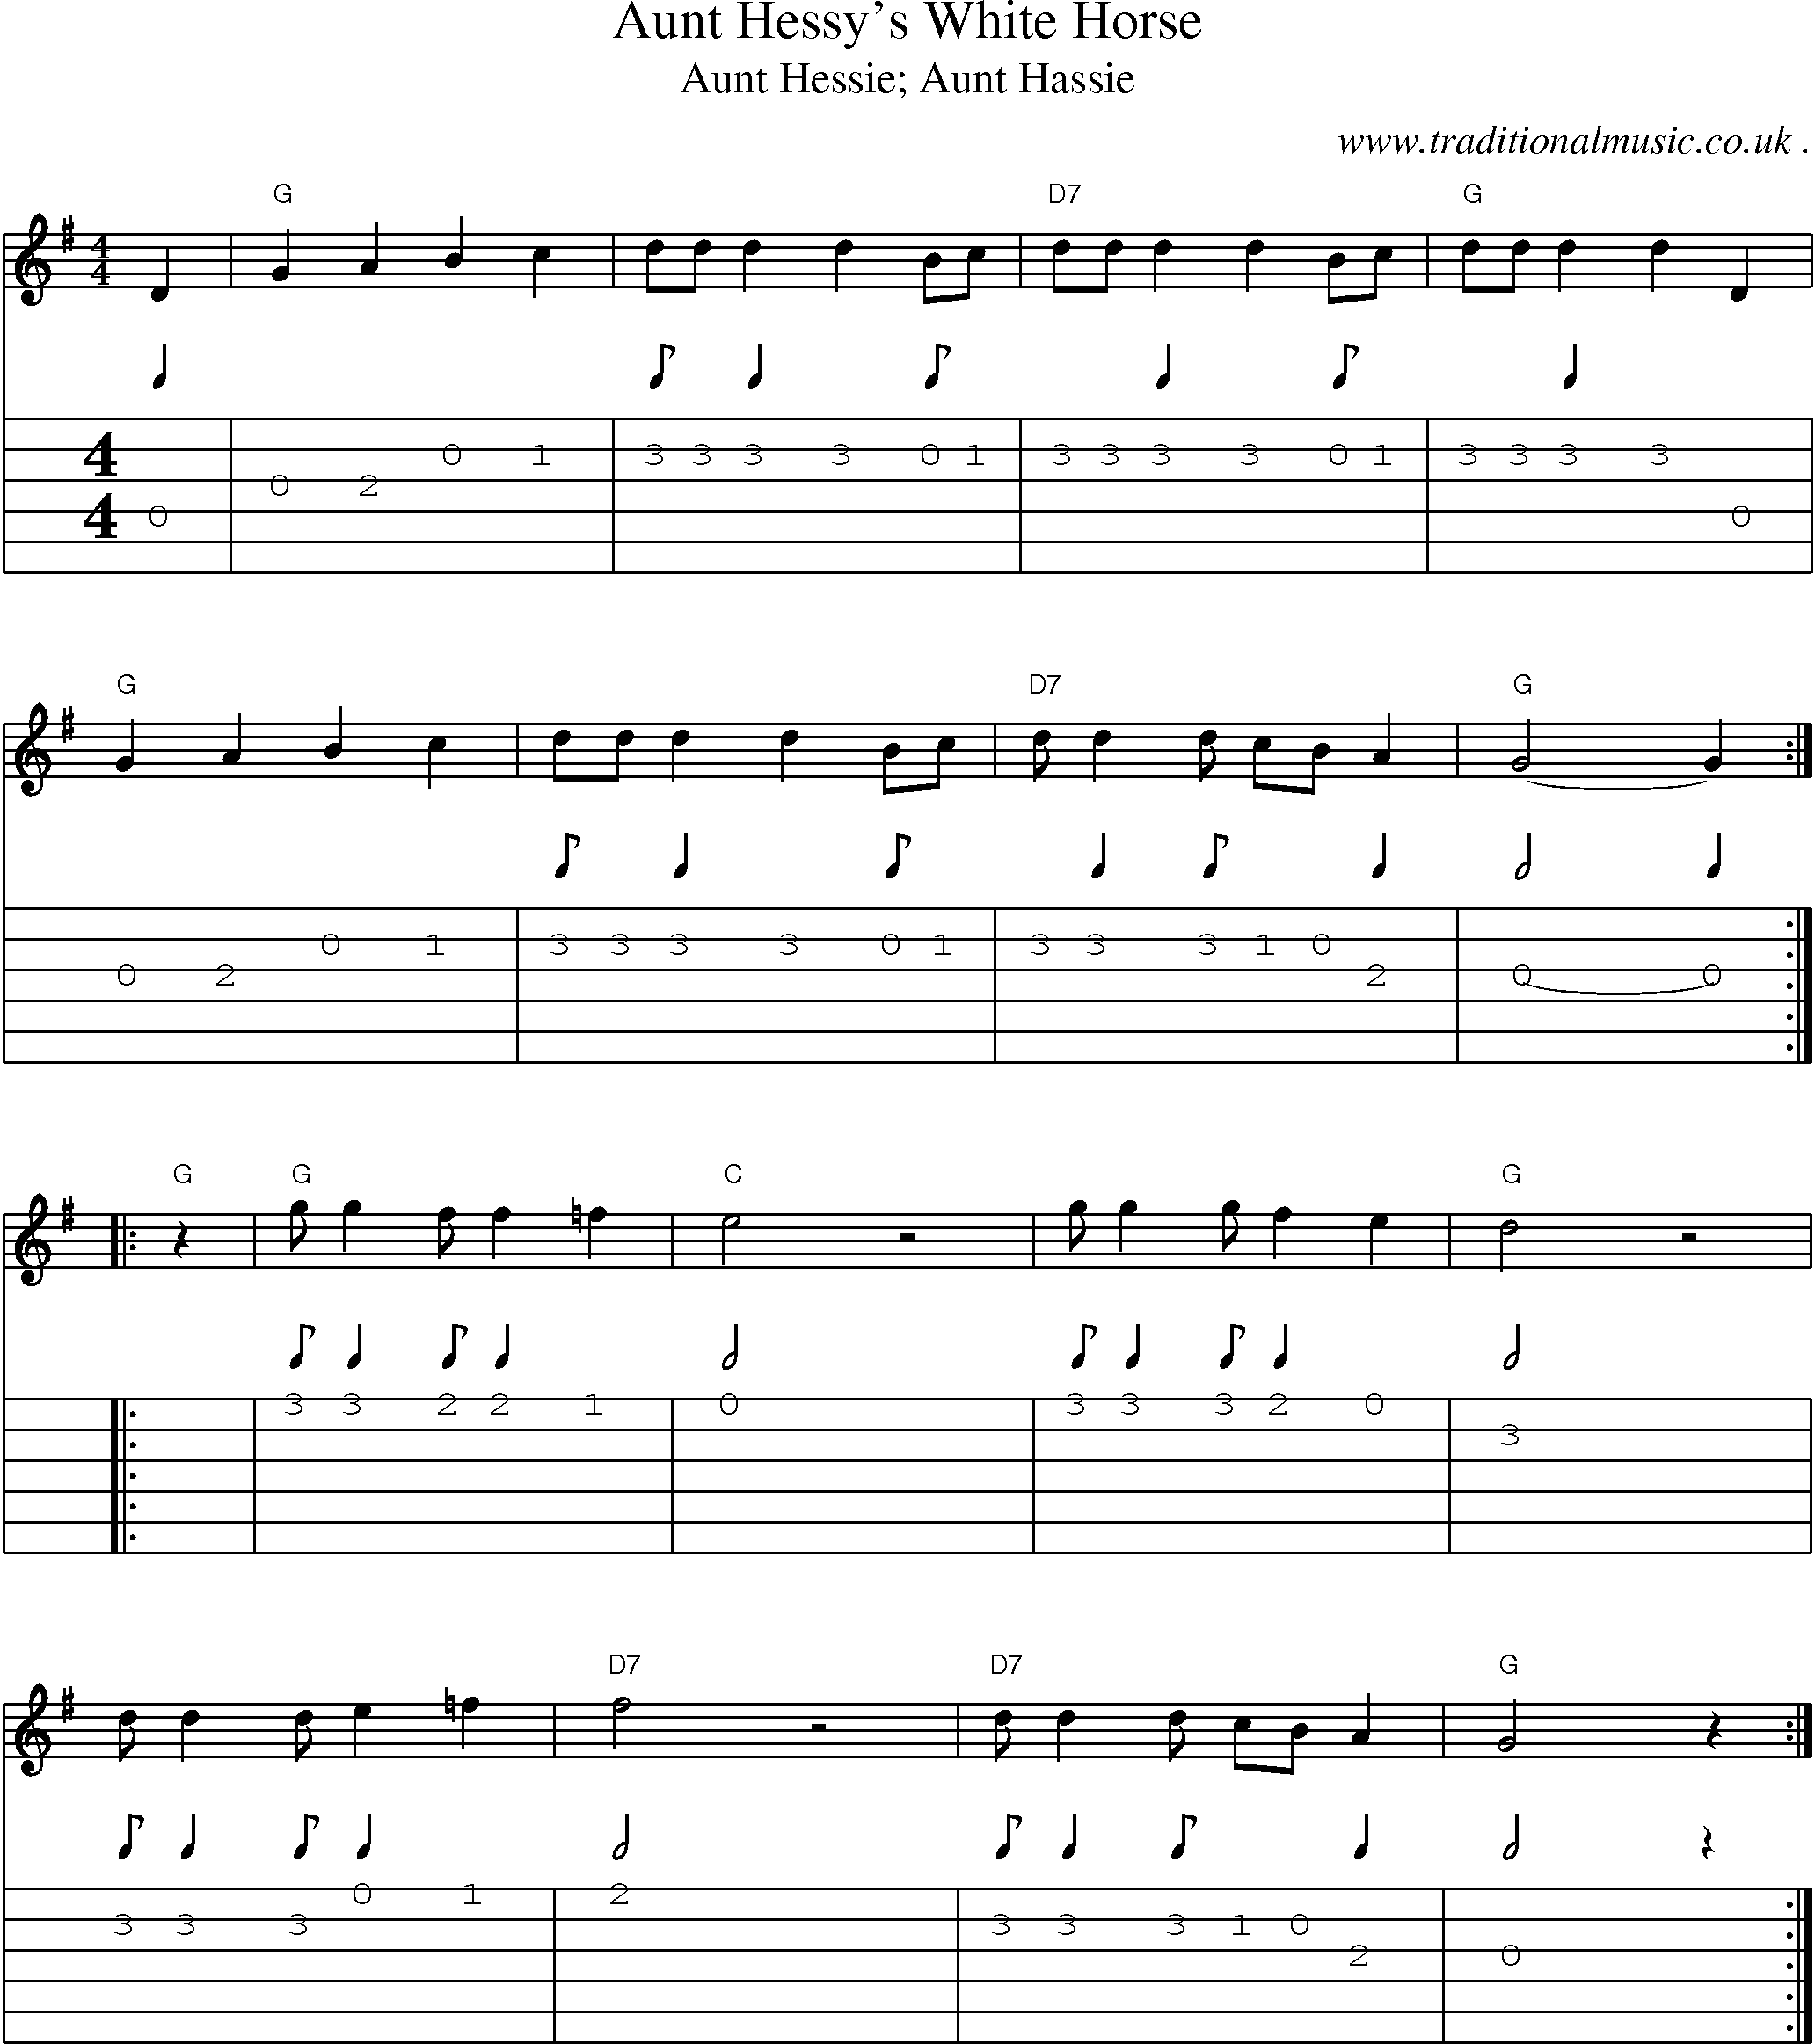 Music Score and Guitar Tabs for Aunt Hessys White Horse